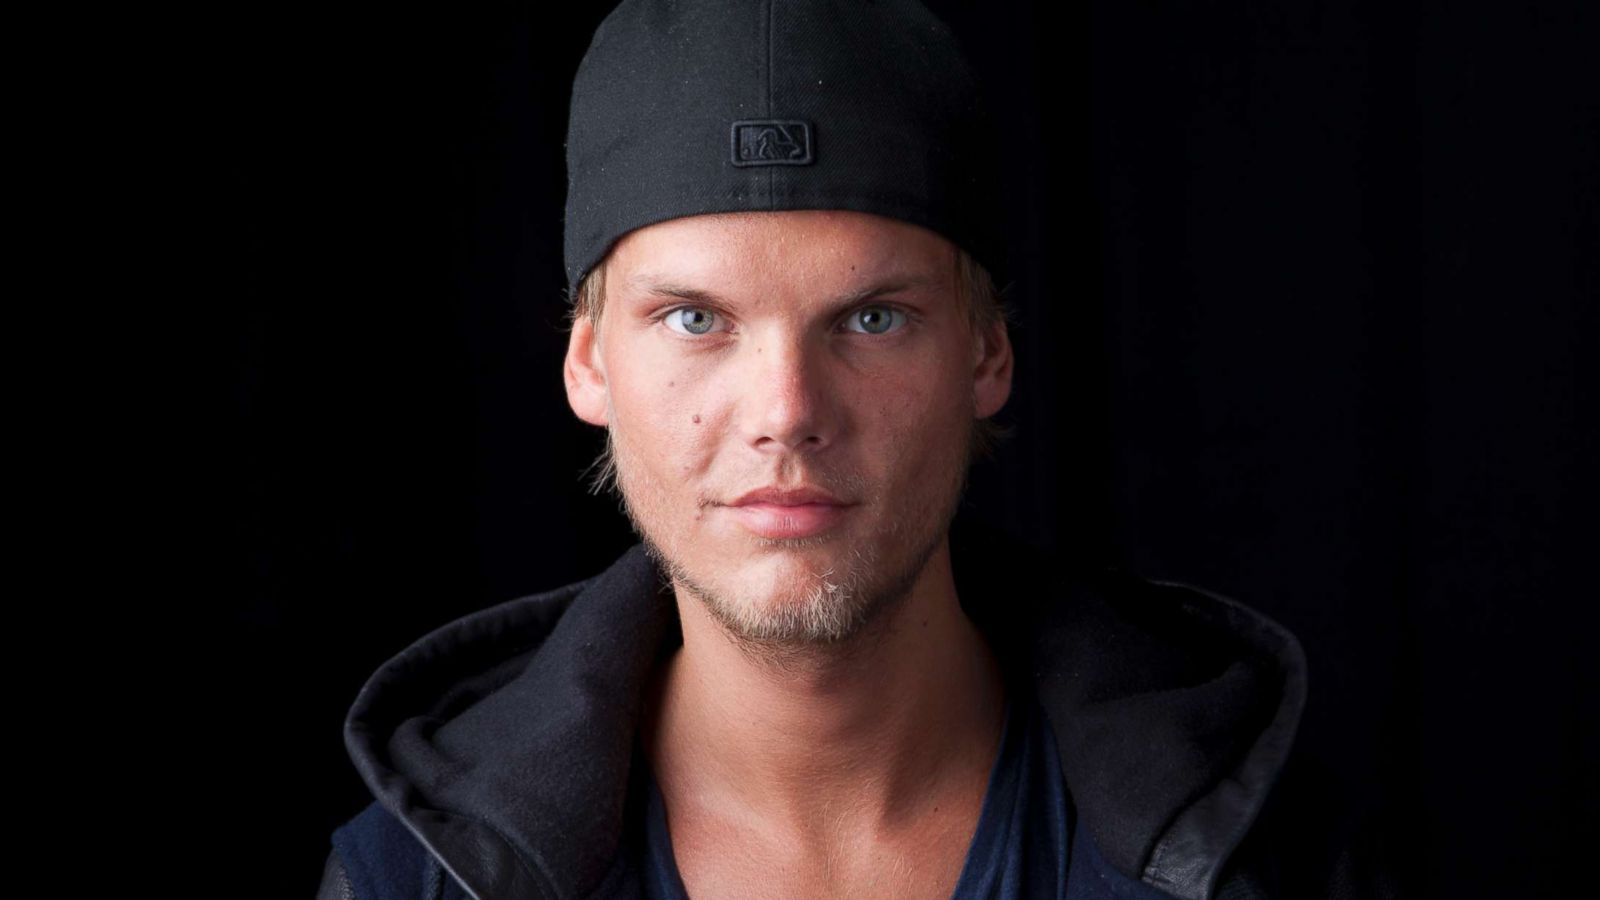 PHOTO: In this file photo, Swedish DJ, remixer and record producer Avicii poses for a portrait, Aug. 30, 2013, in New York.